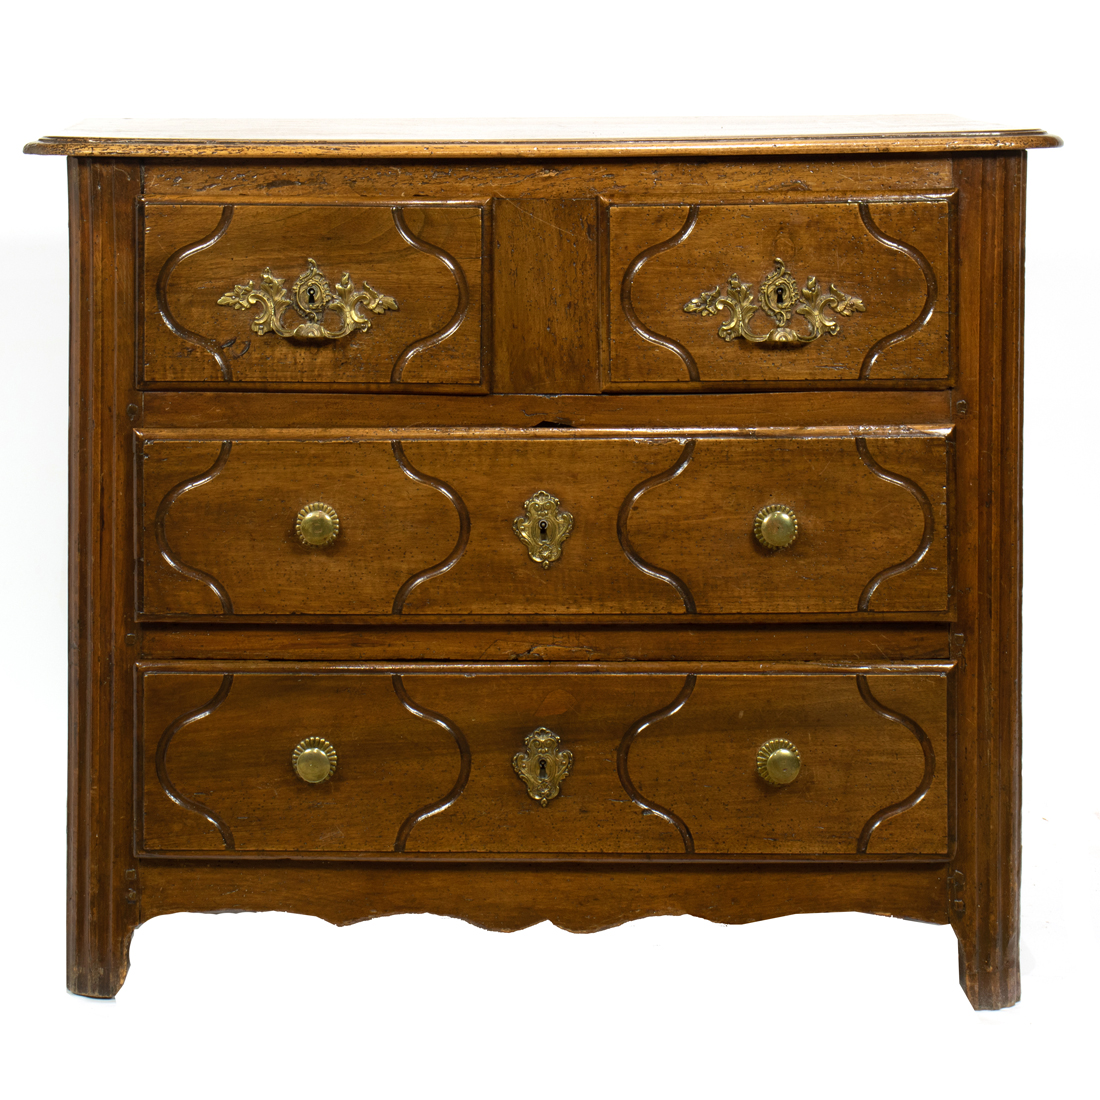 A FRENCH REGENCE COMMODE 18TH CENTURY 3a16dd